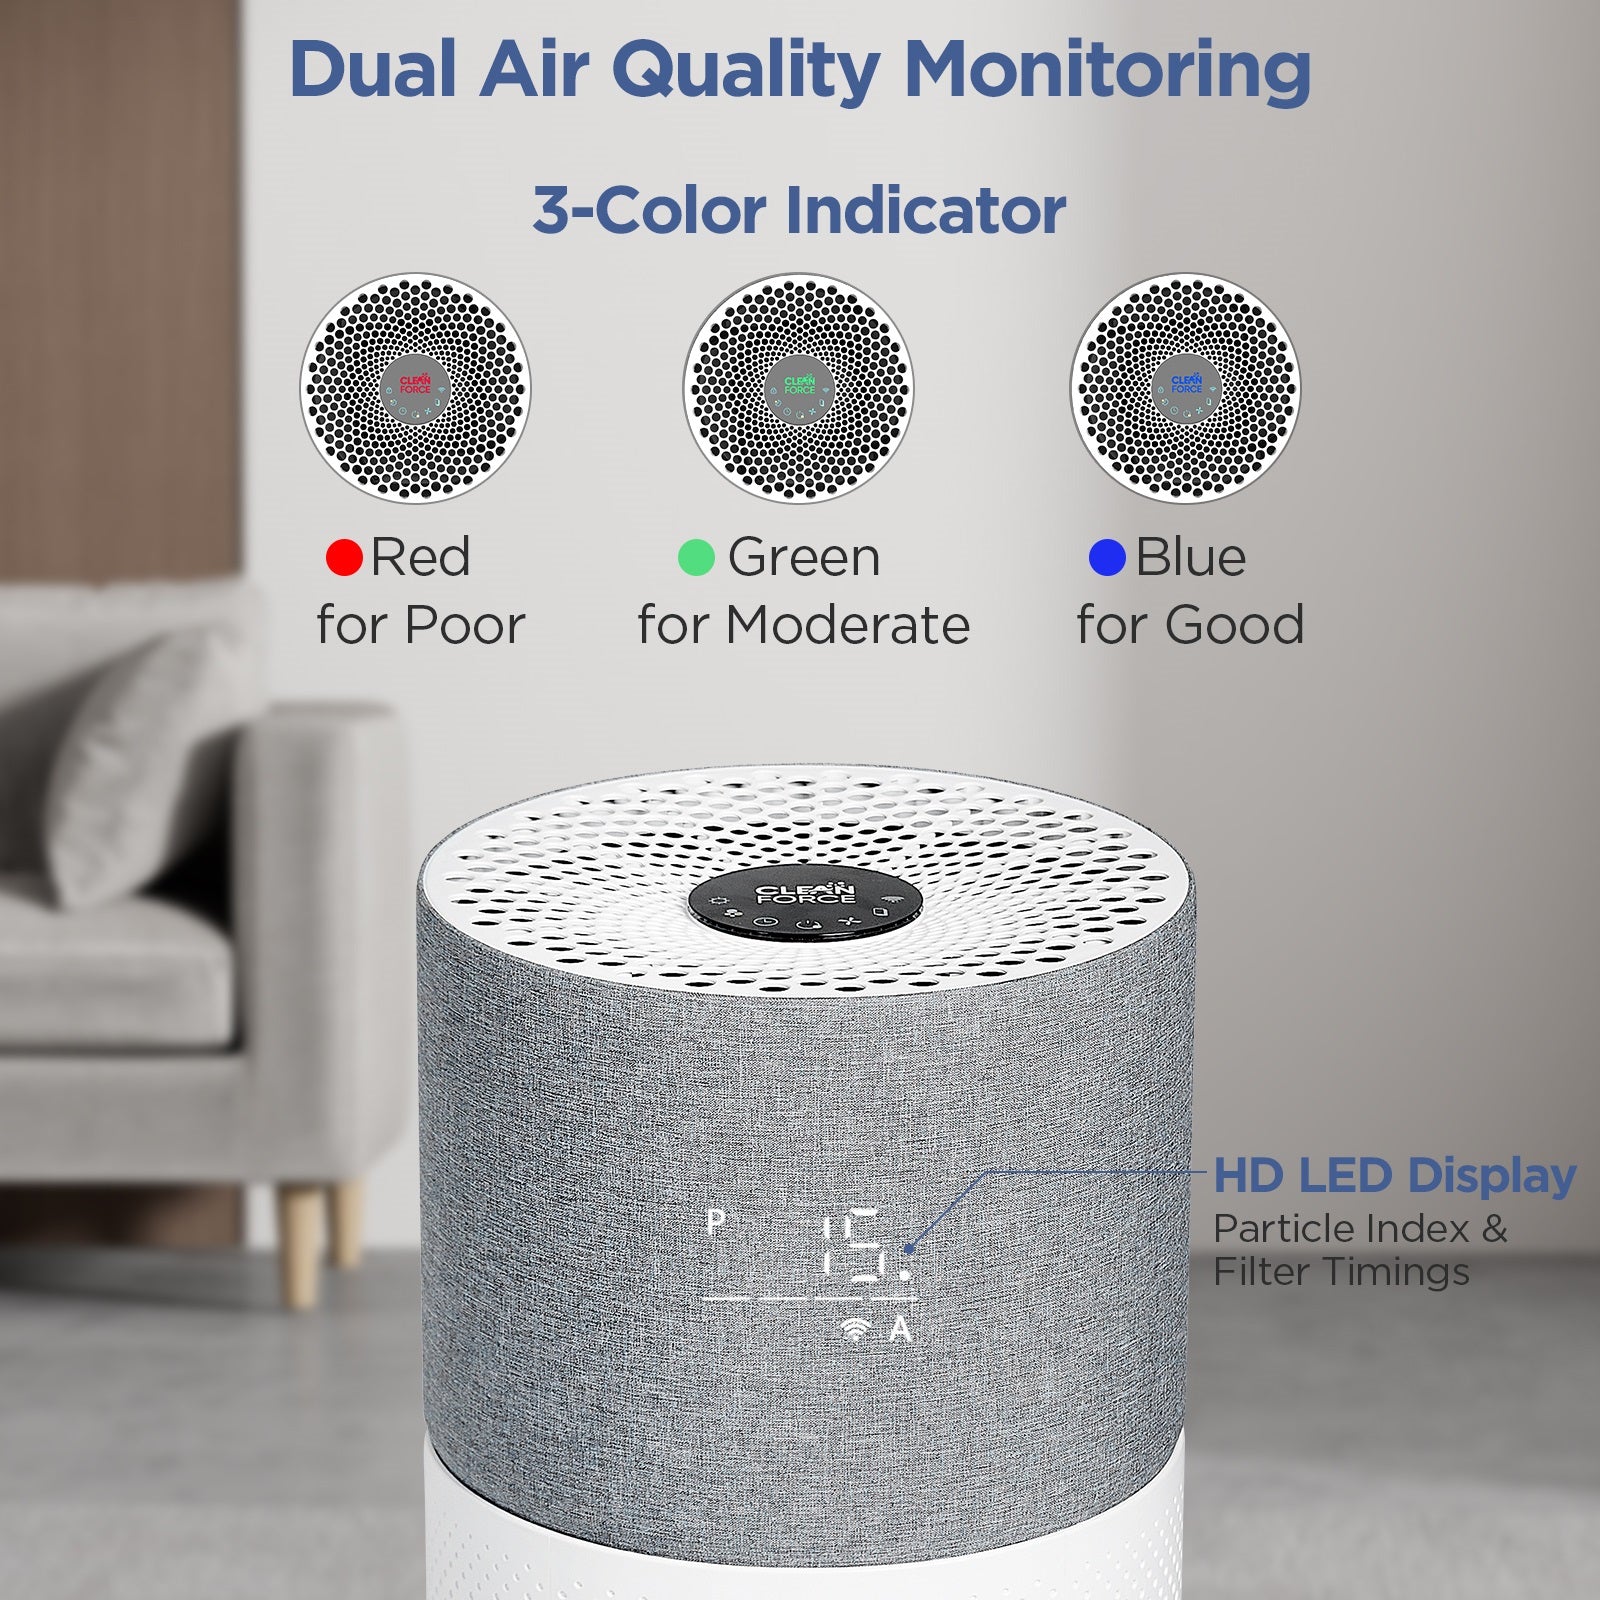 CleanForce Rainbow Air Purifier for Home Large Room - Asthma&Allergy Friendly Certified, up to 2550sqft, 99.99% Efficient Allergen, Smart Control with Monitor, Perfect for Allergy, Asthma, Pet Owners